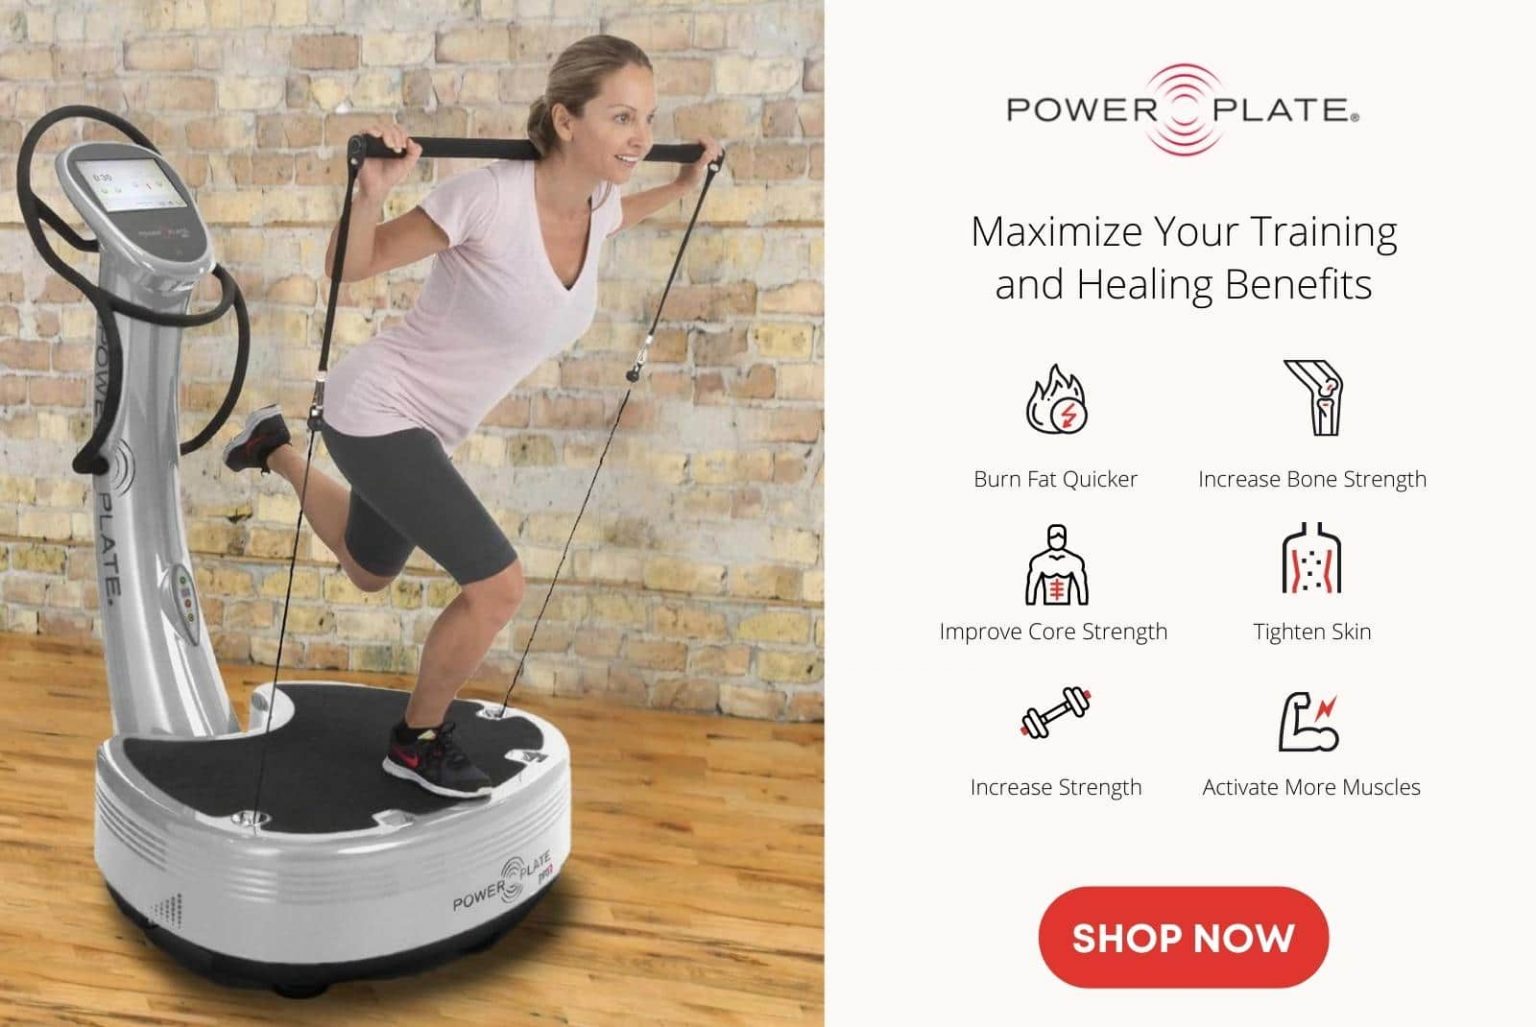 Maximize your training and health benefits with the Power Plate pro7